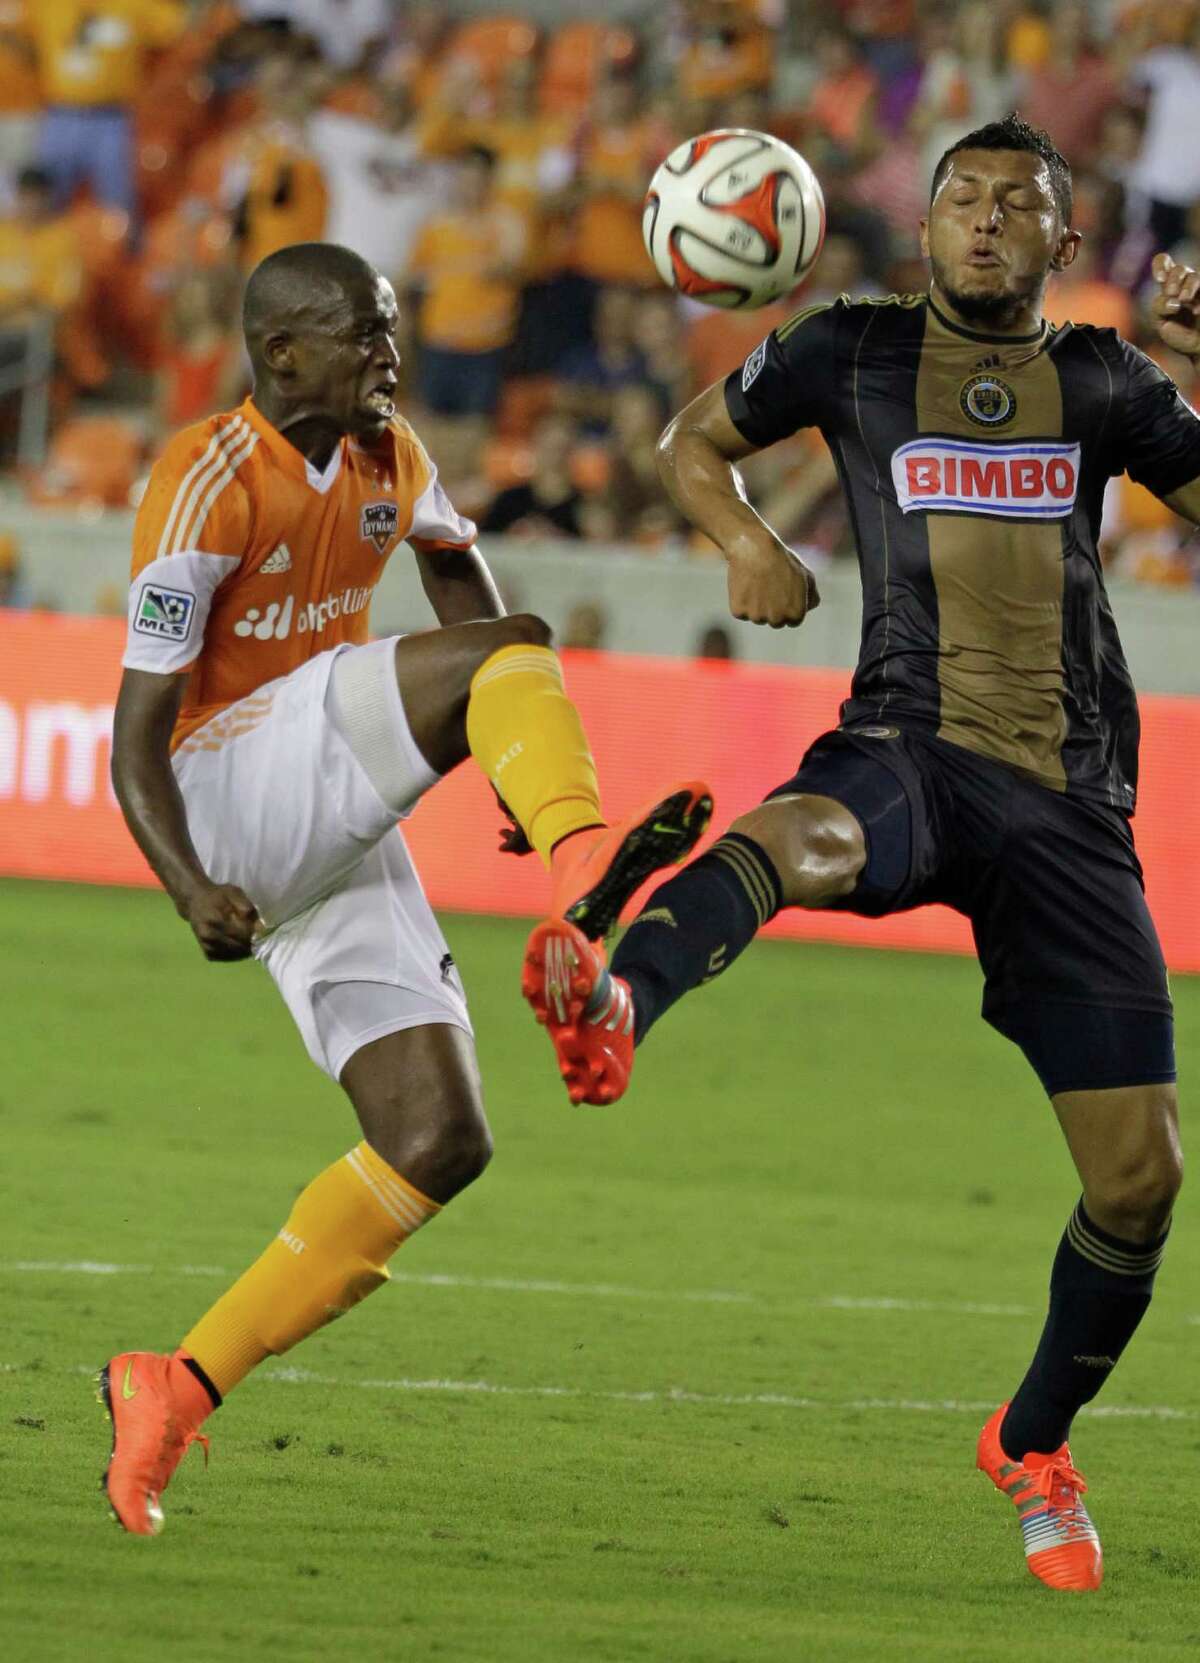 Houston Dynamo Boniek Garcia, left, and Philadelphia Union Carlos Valdes battle for the ball during the first half of game at BBVA Compass Stadium Friday, Aug. 15, 2014, in Houston.